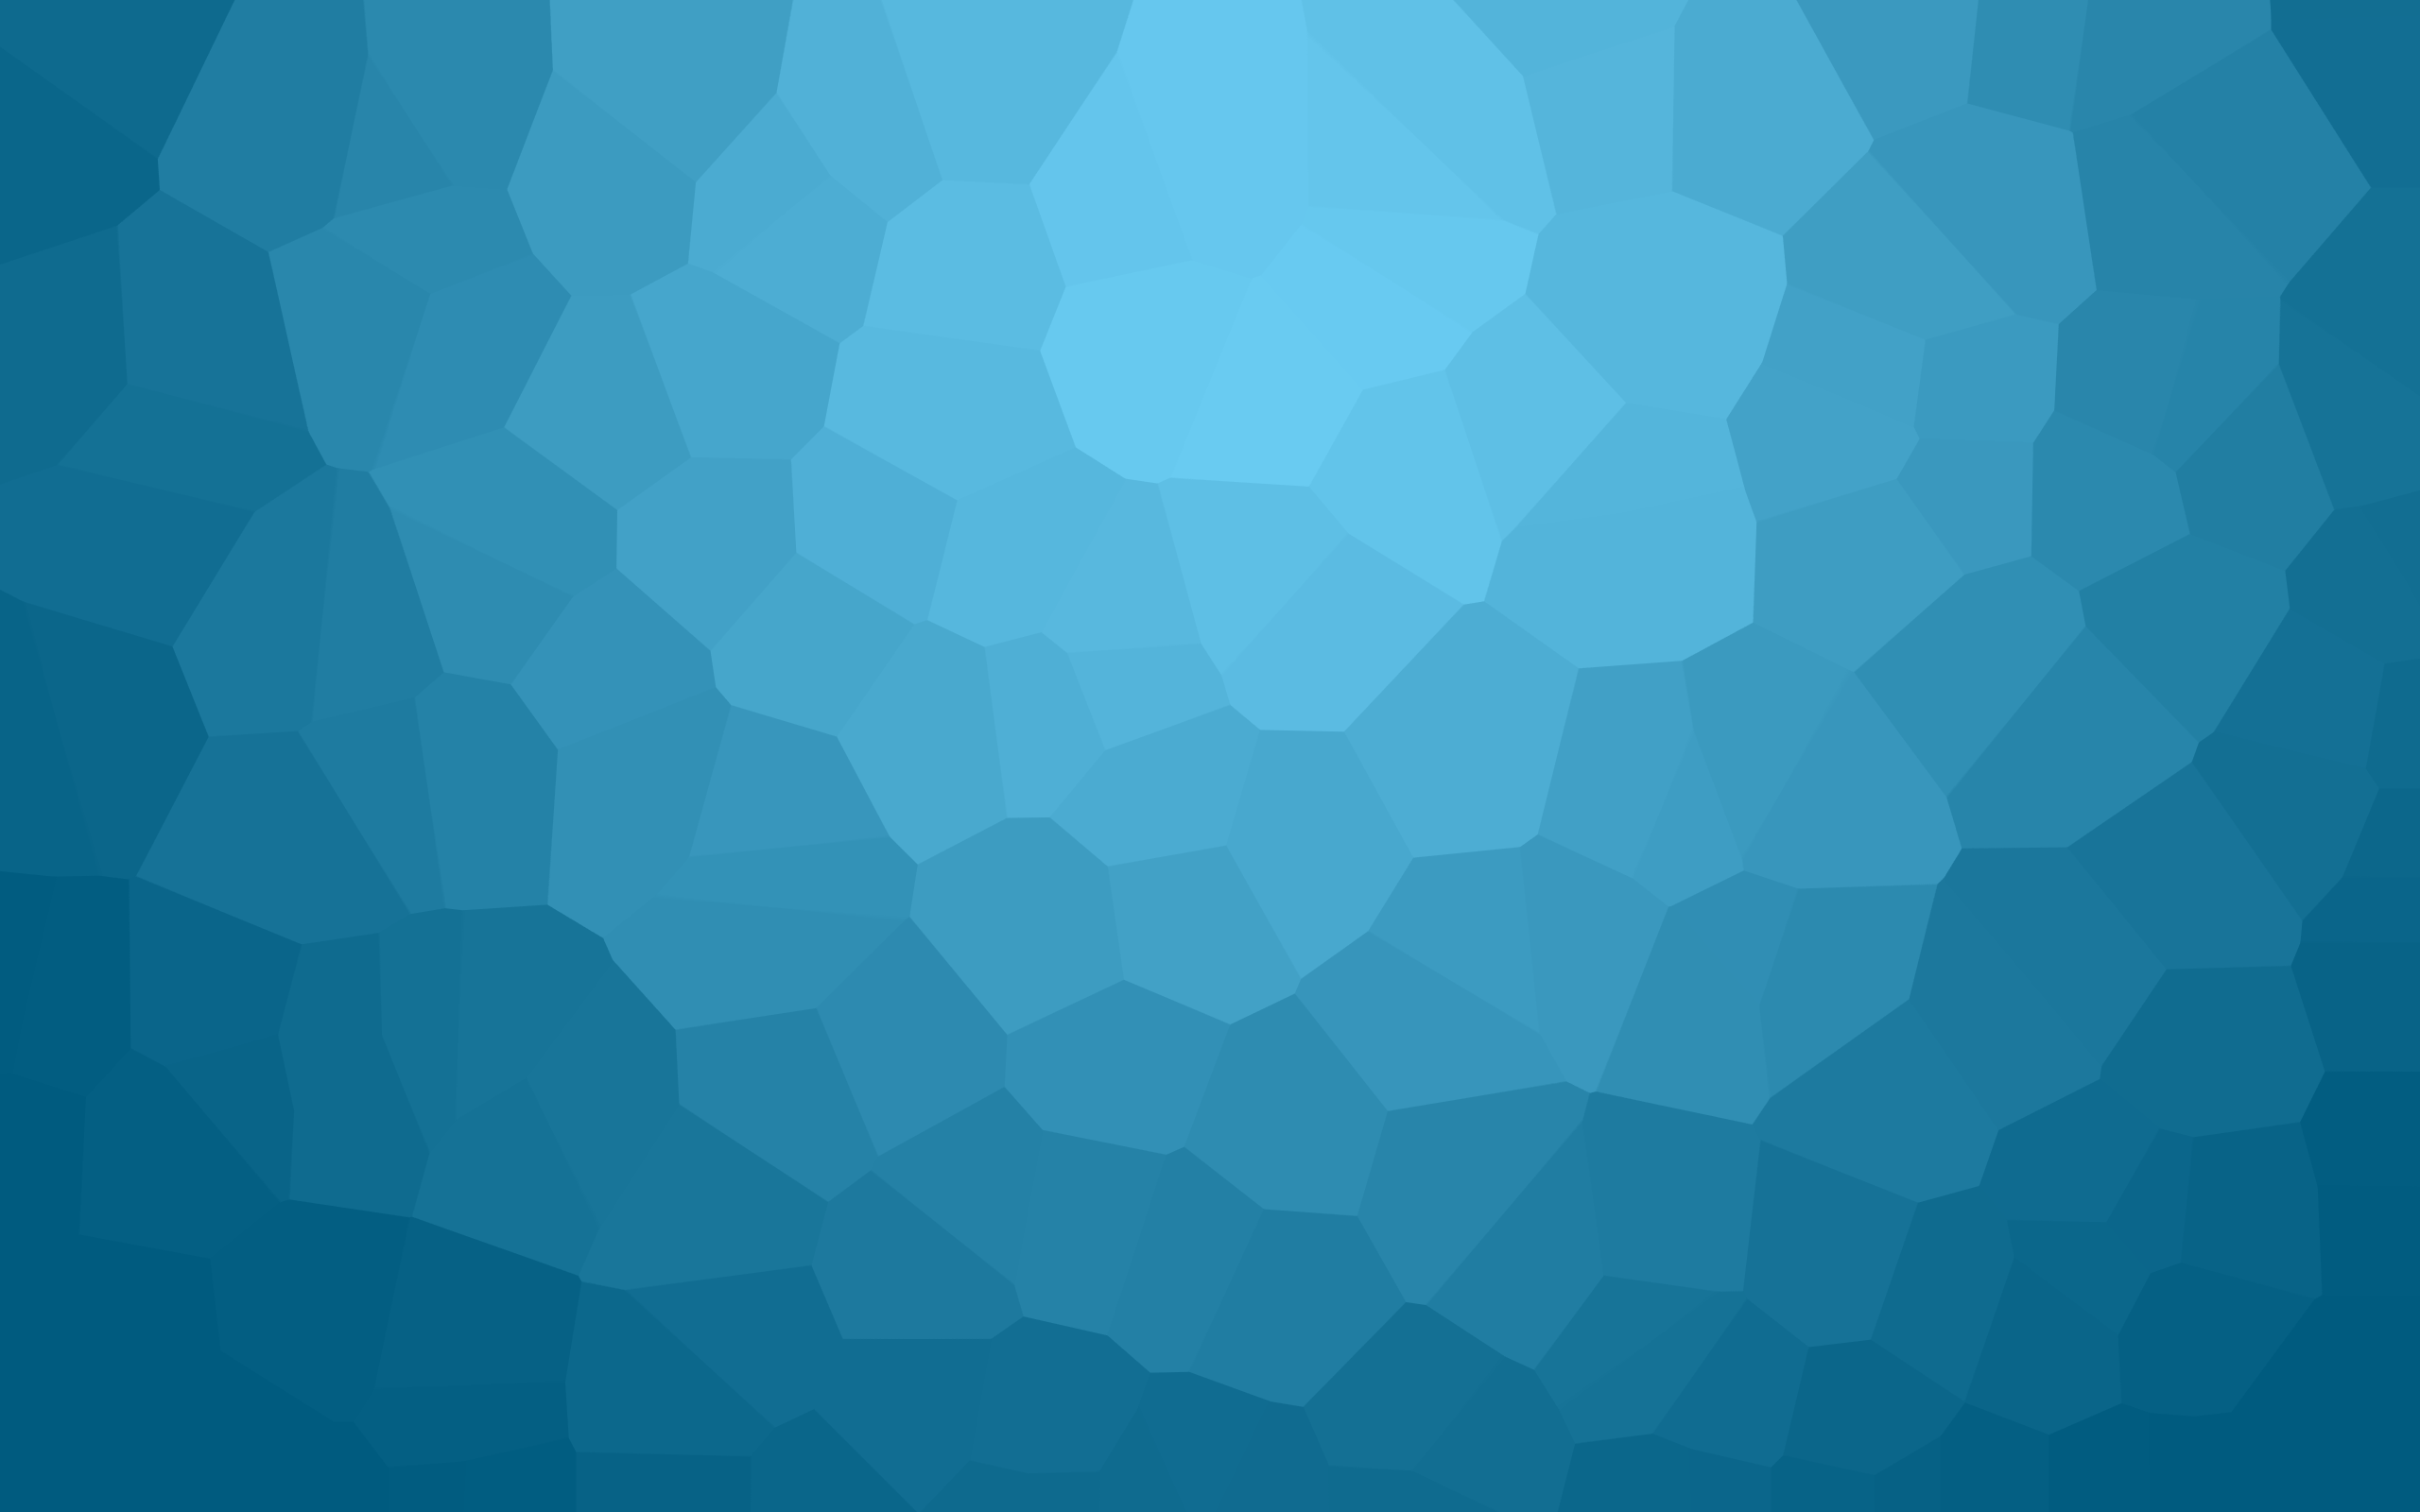 #minimalism, #abstract, #blue, #low poly, #gradient, wallpaper. Mocah.org HD Wallpaper